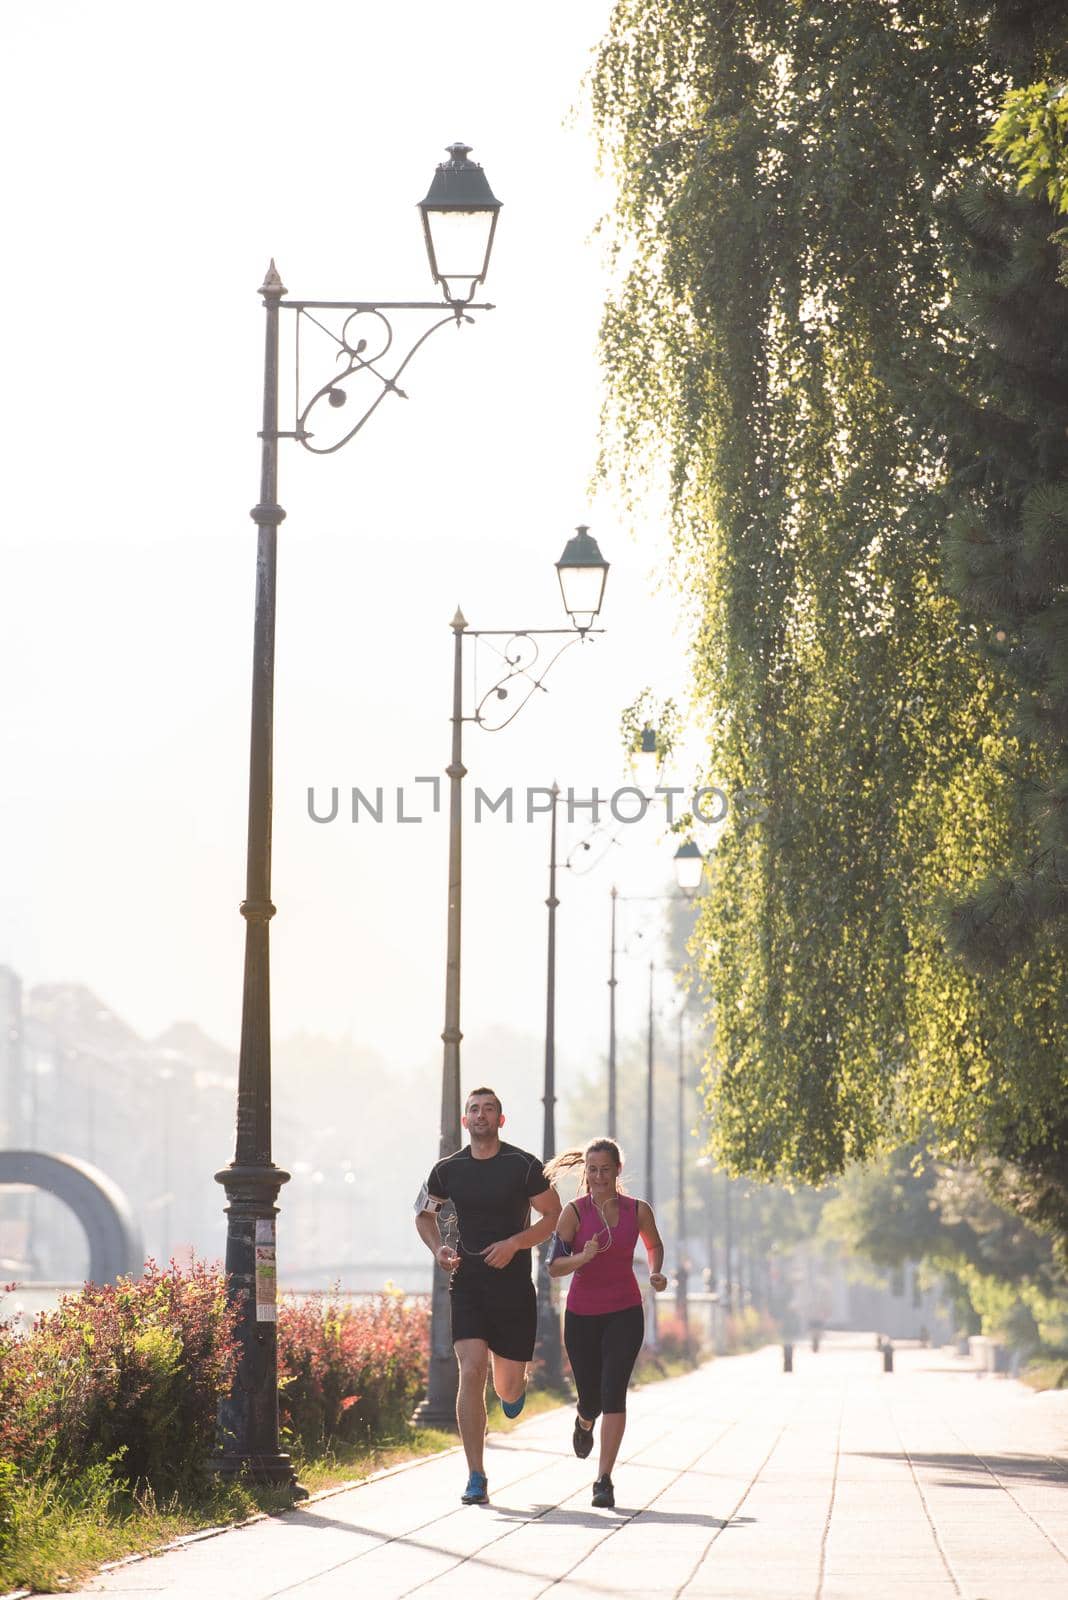 young couple jogging  in the city by dotshock